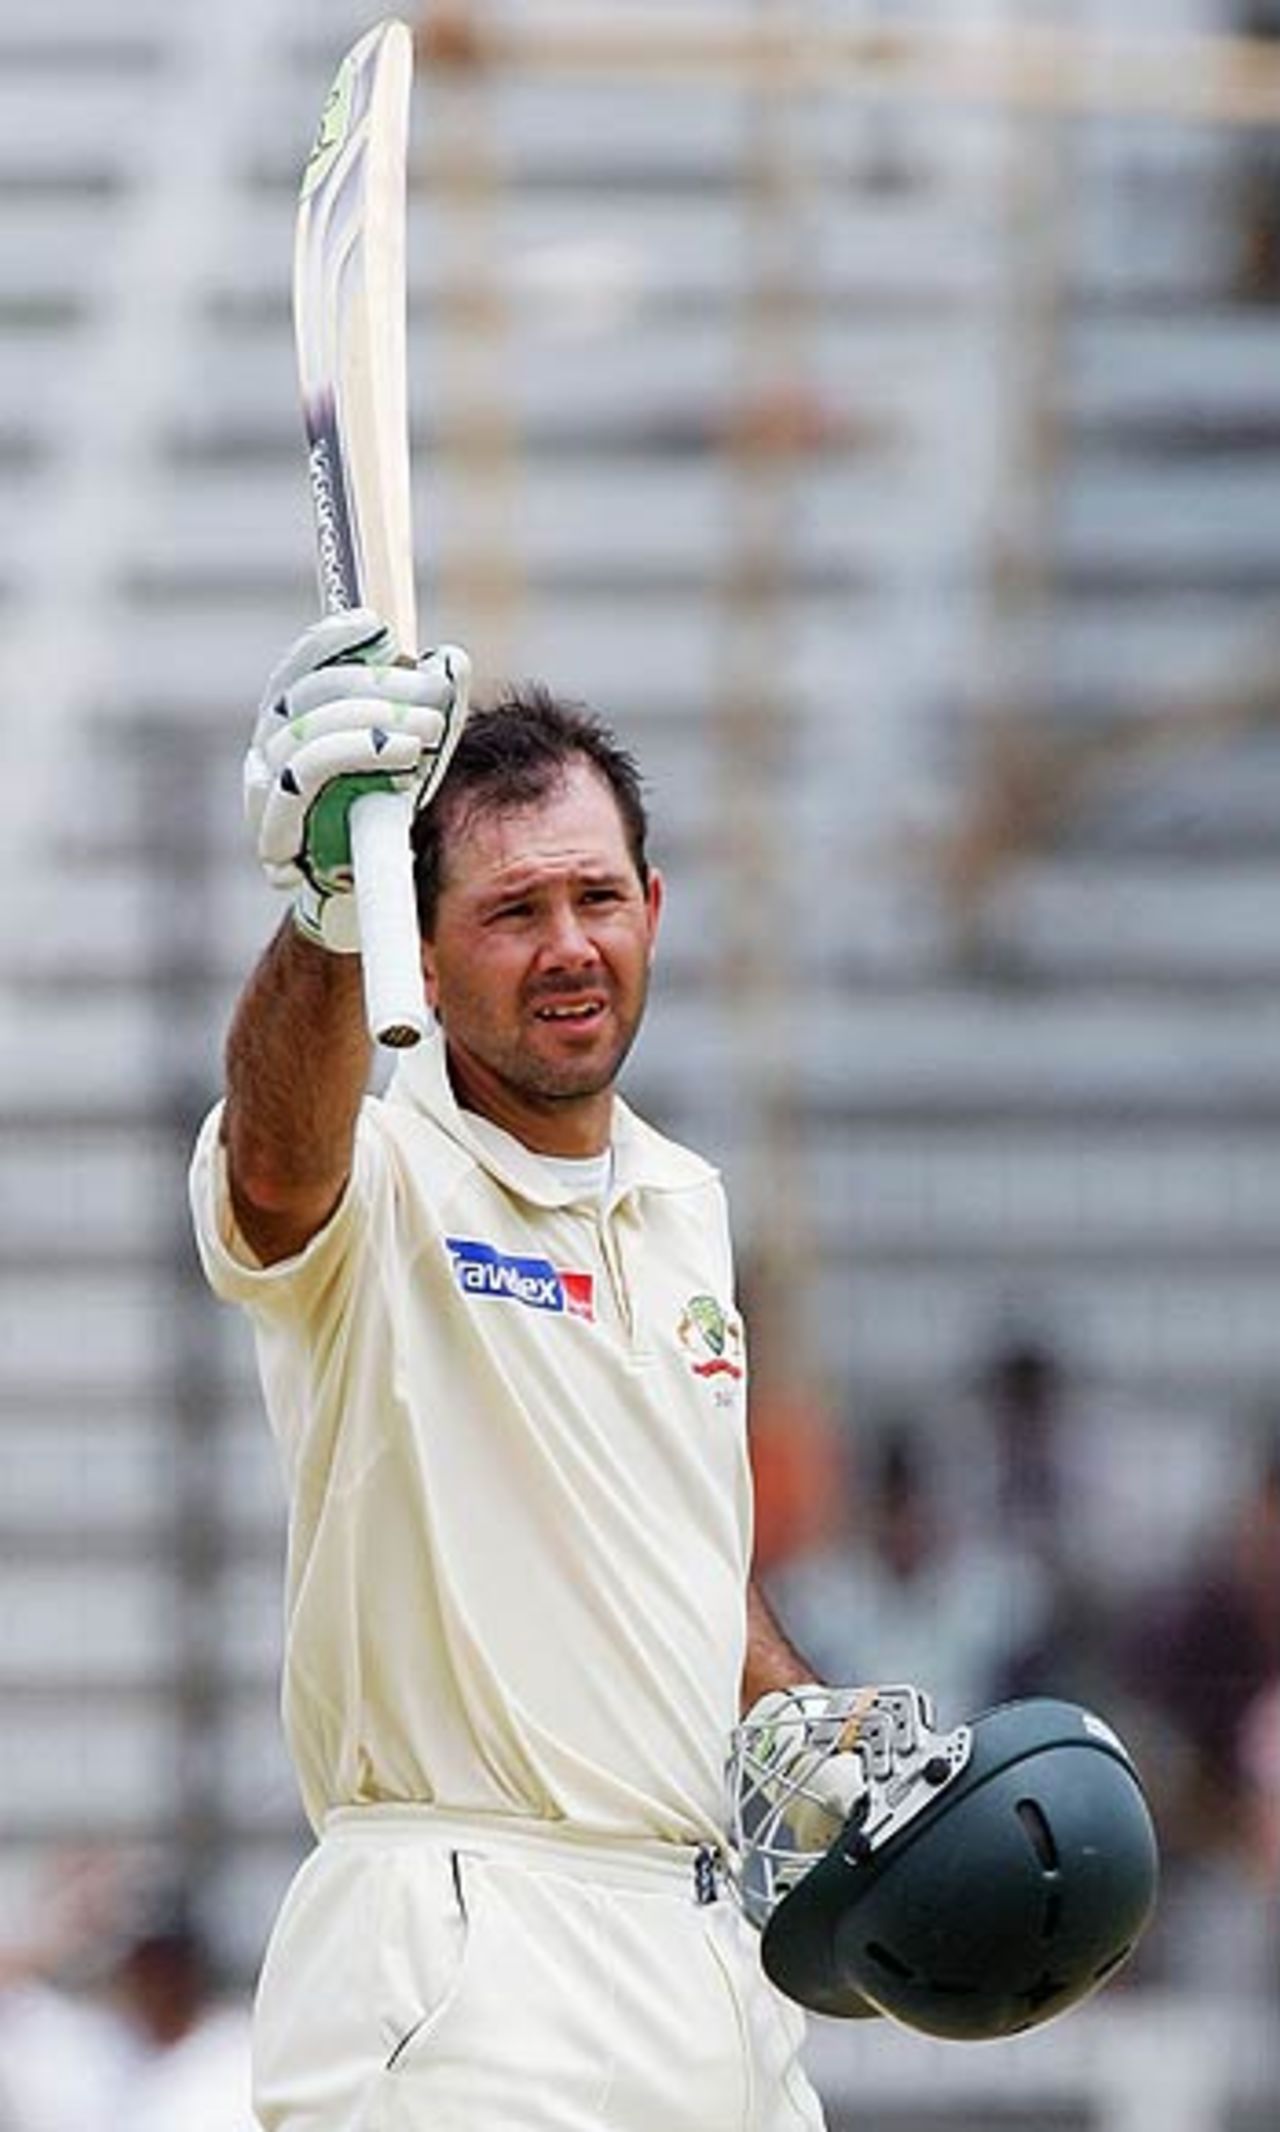 Ricky Ponting's Australia side are now big favourites for this winter's Ashes